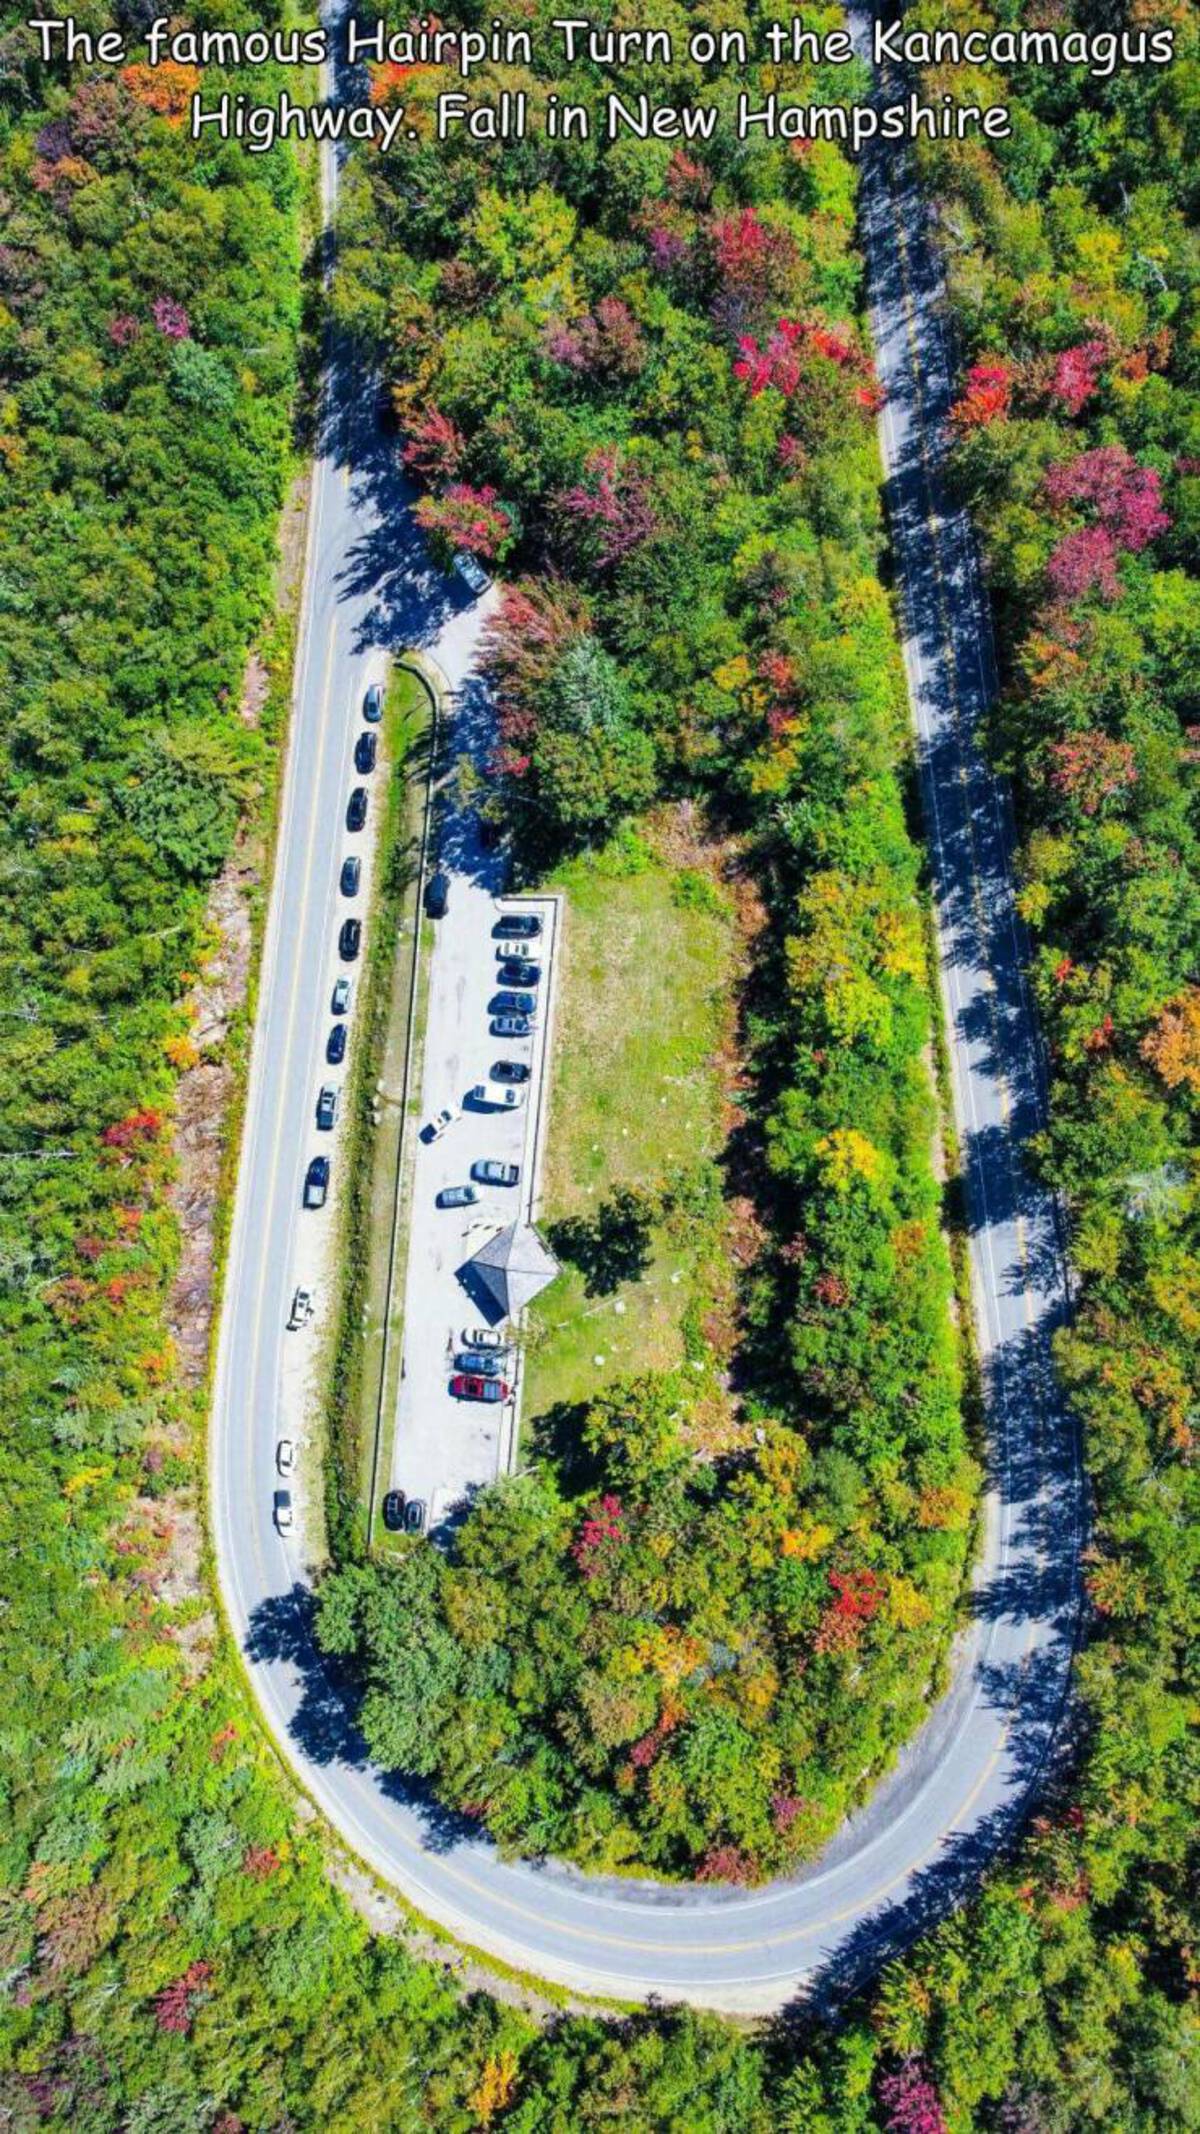 vegetation - The famous Hairpin Turn on the Kancamagus Highway Fall in New Hampshire